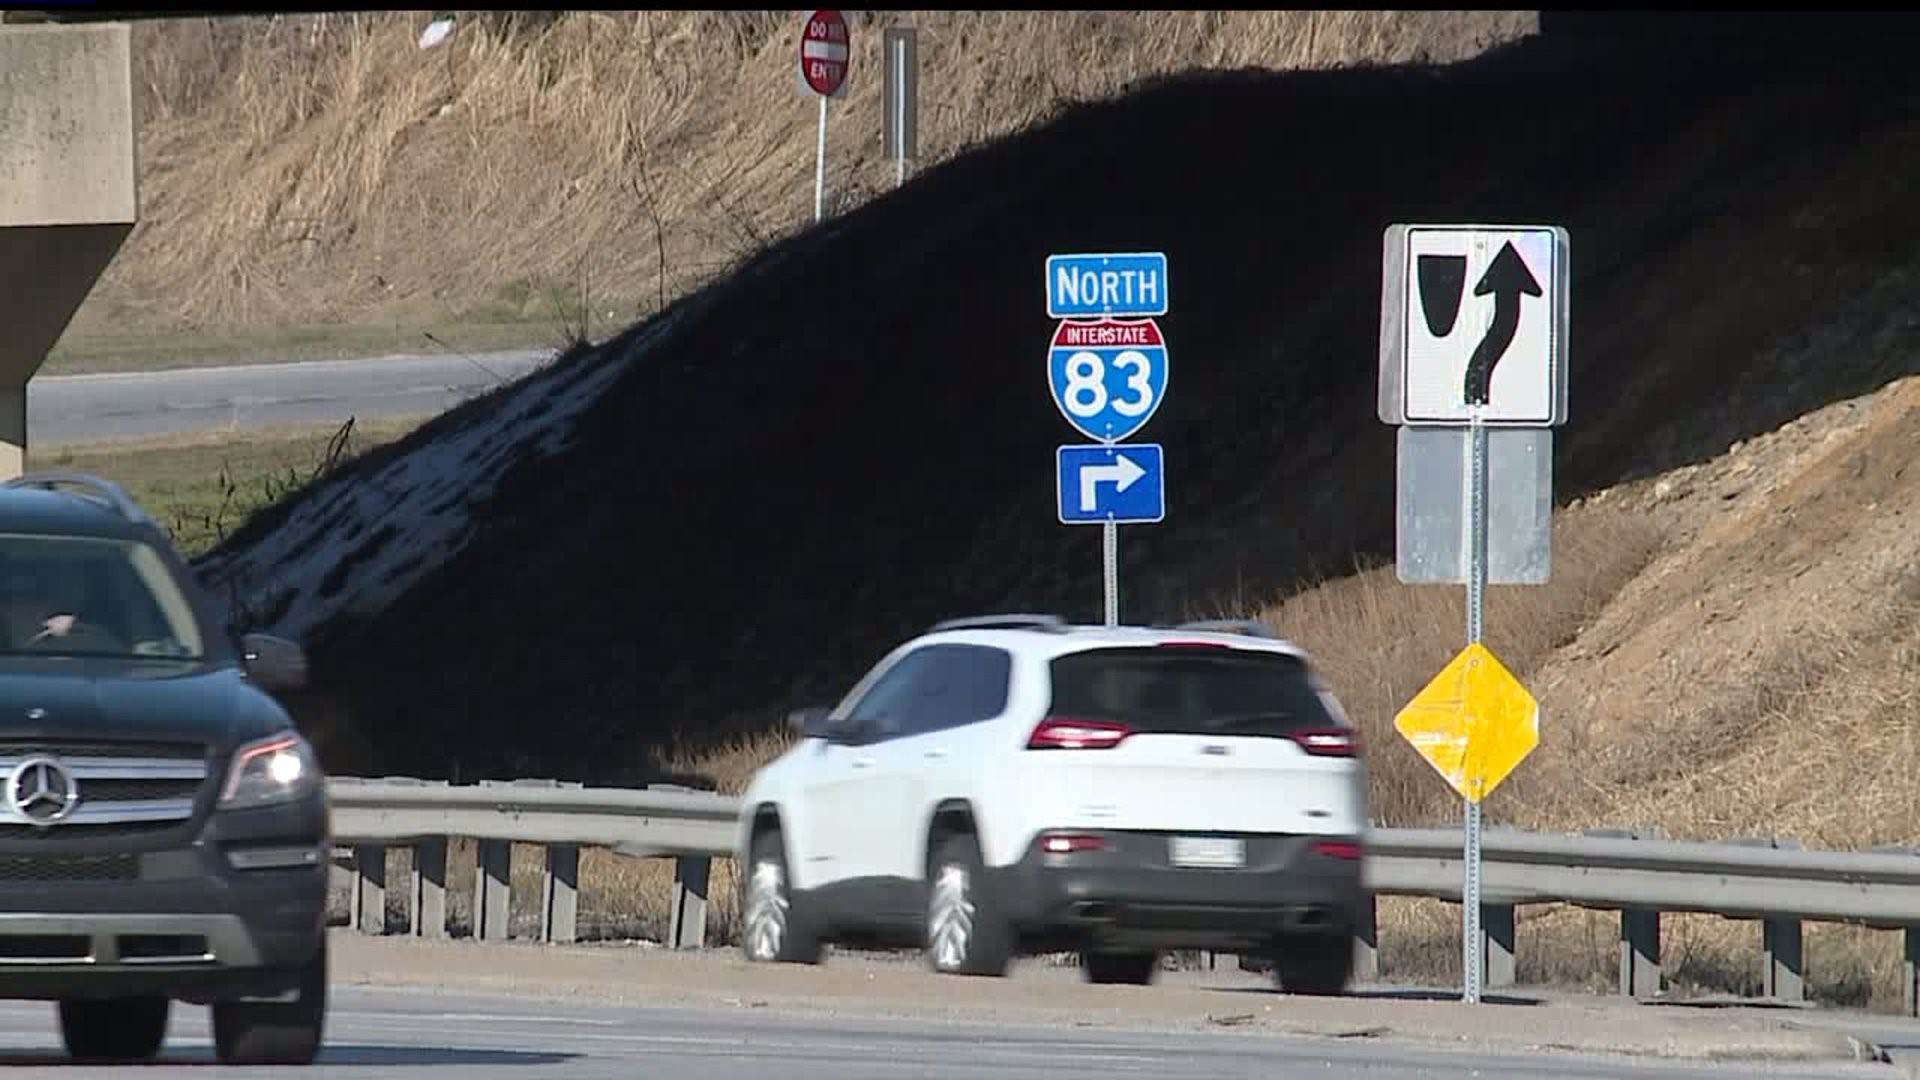 PennDOT plans for I-83 widening project in York County